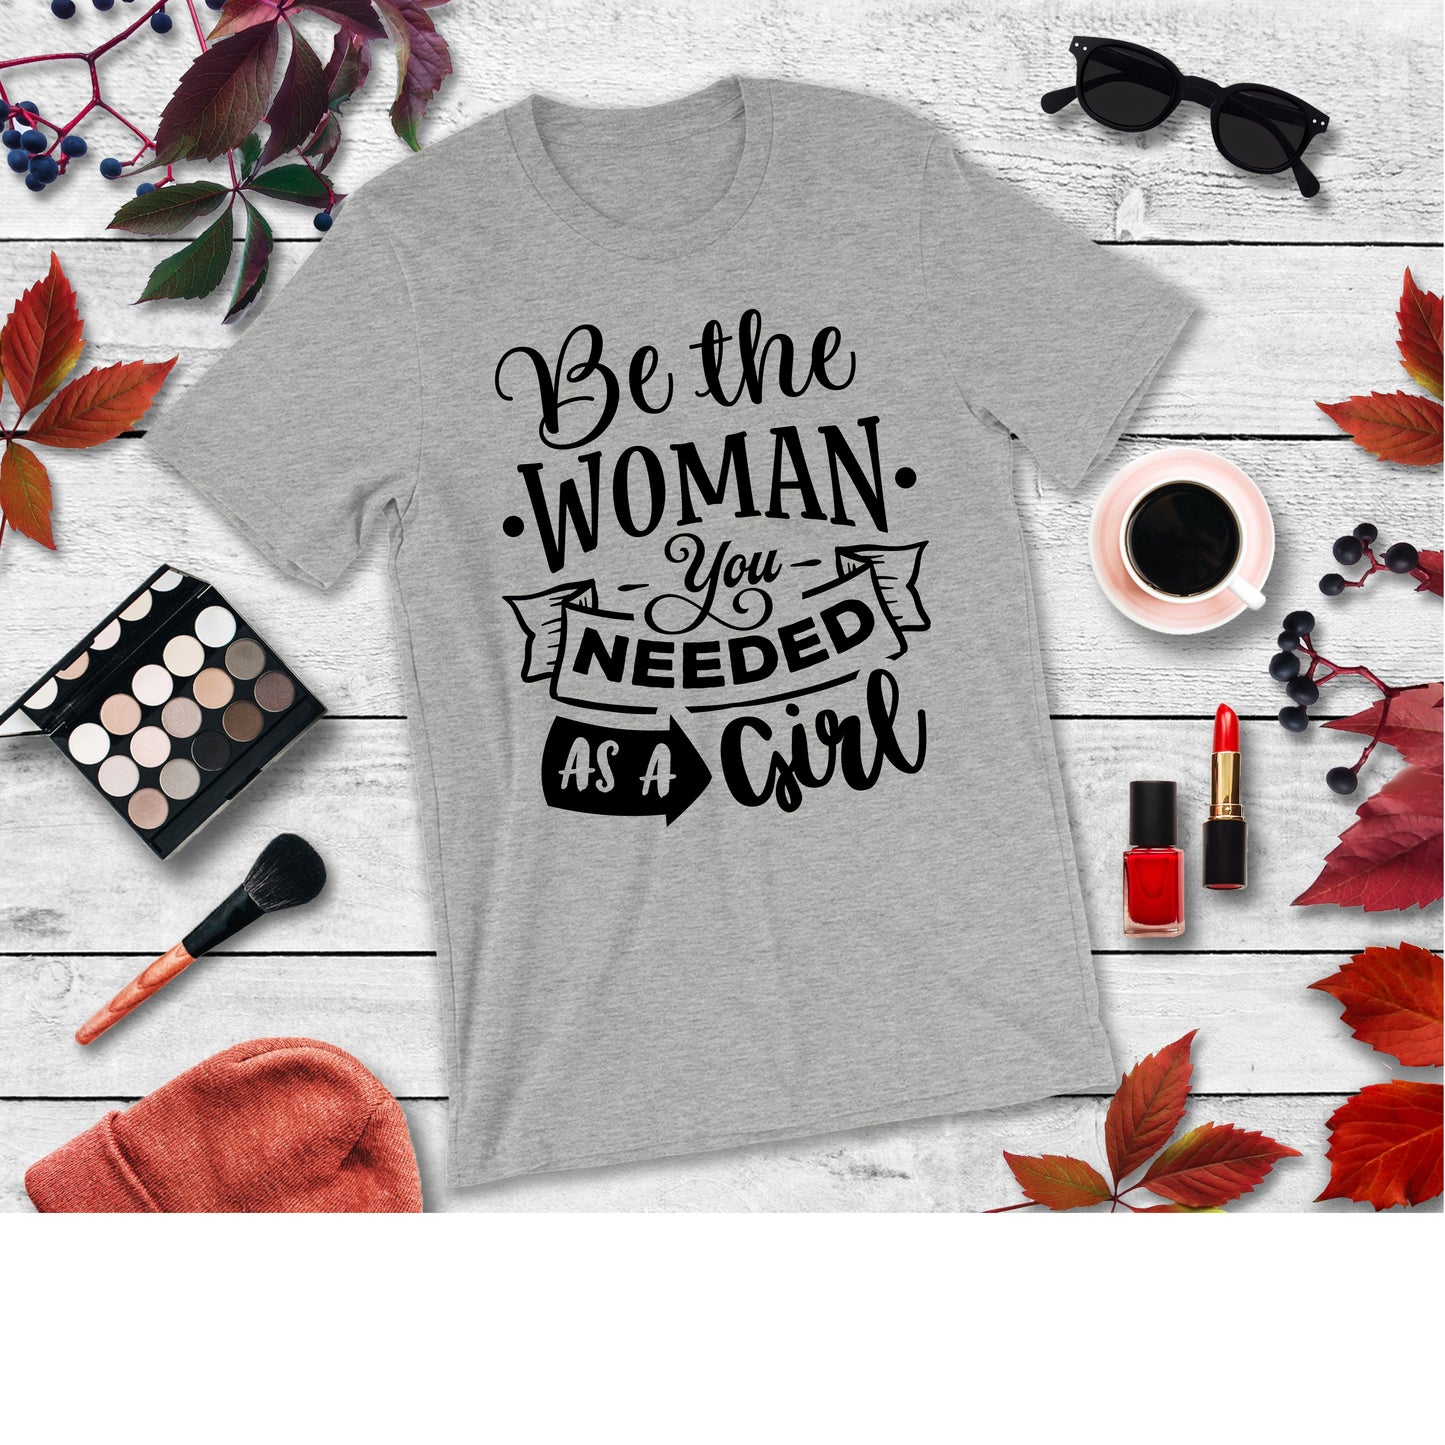 "Be the Woman you needed as a girl" Tee